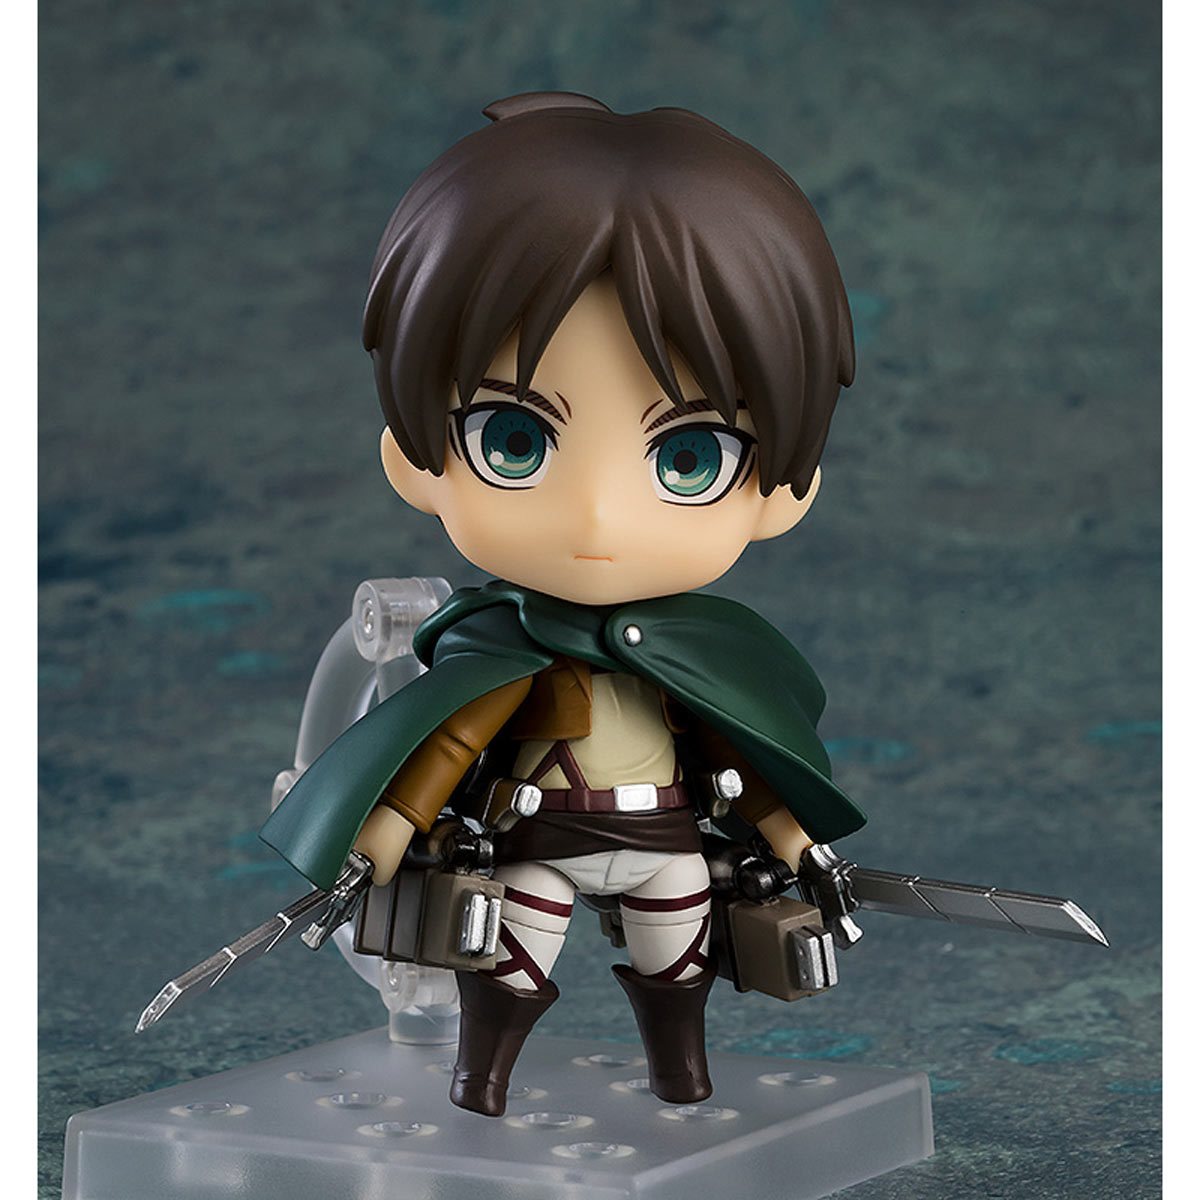 Attack on Titan - Eren Yeager Action Figure Good Smile Company (Survey Corps Version) Nendoroid